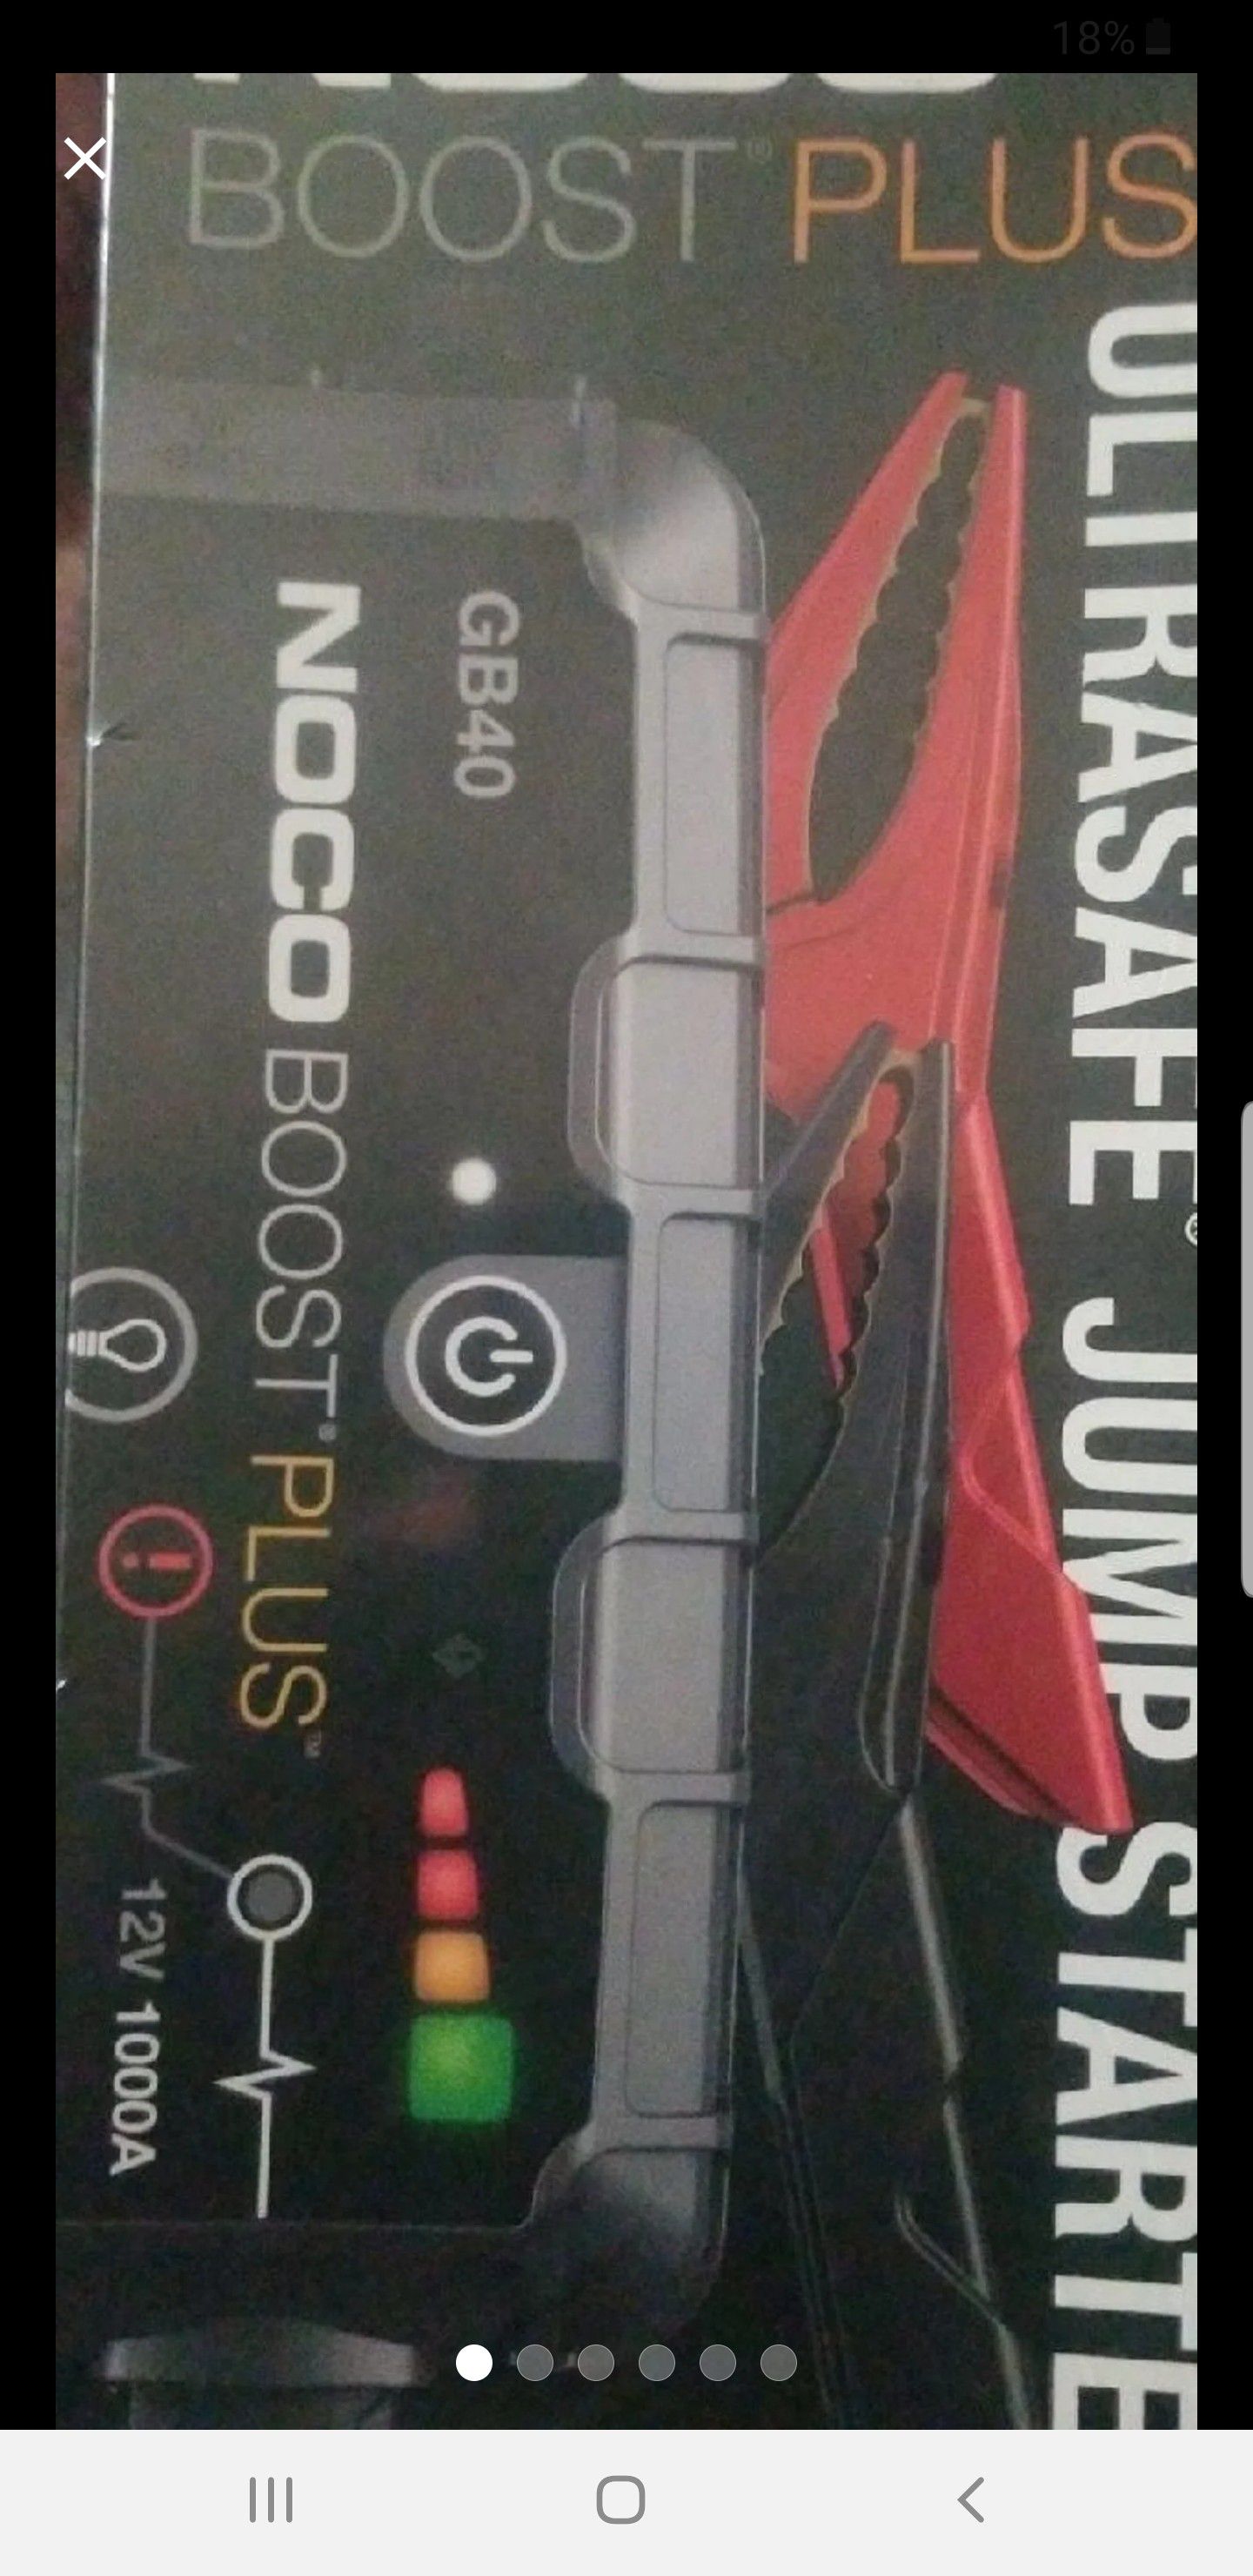 Noco Boost Plus GB40 ultrasafe jump starter sealed never open